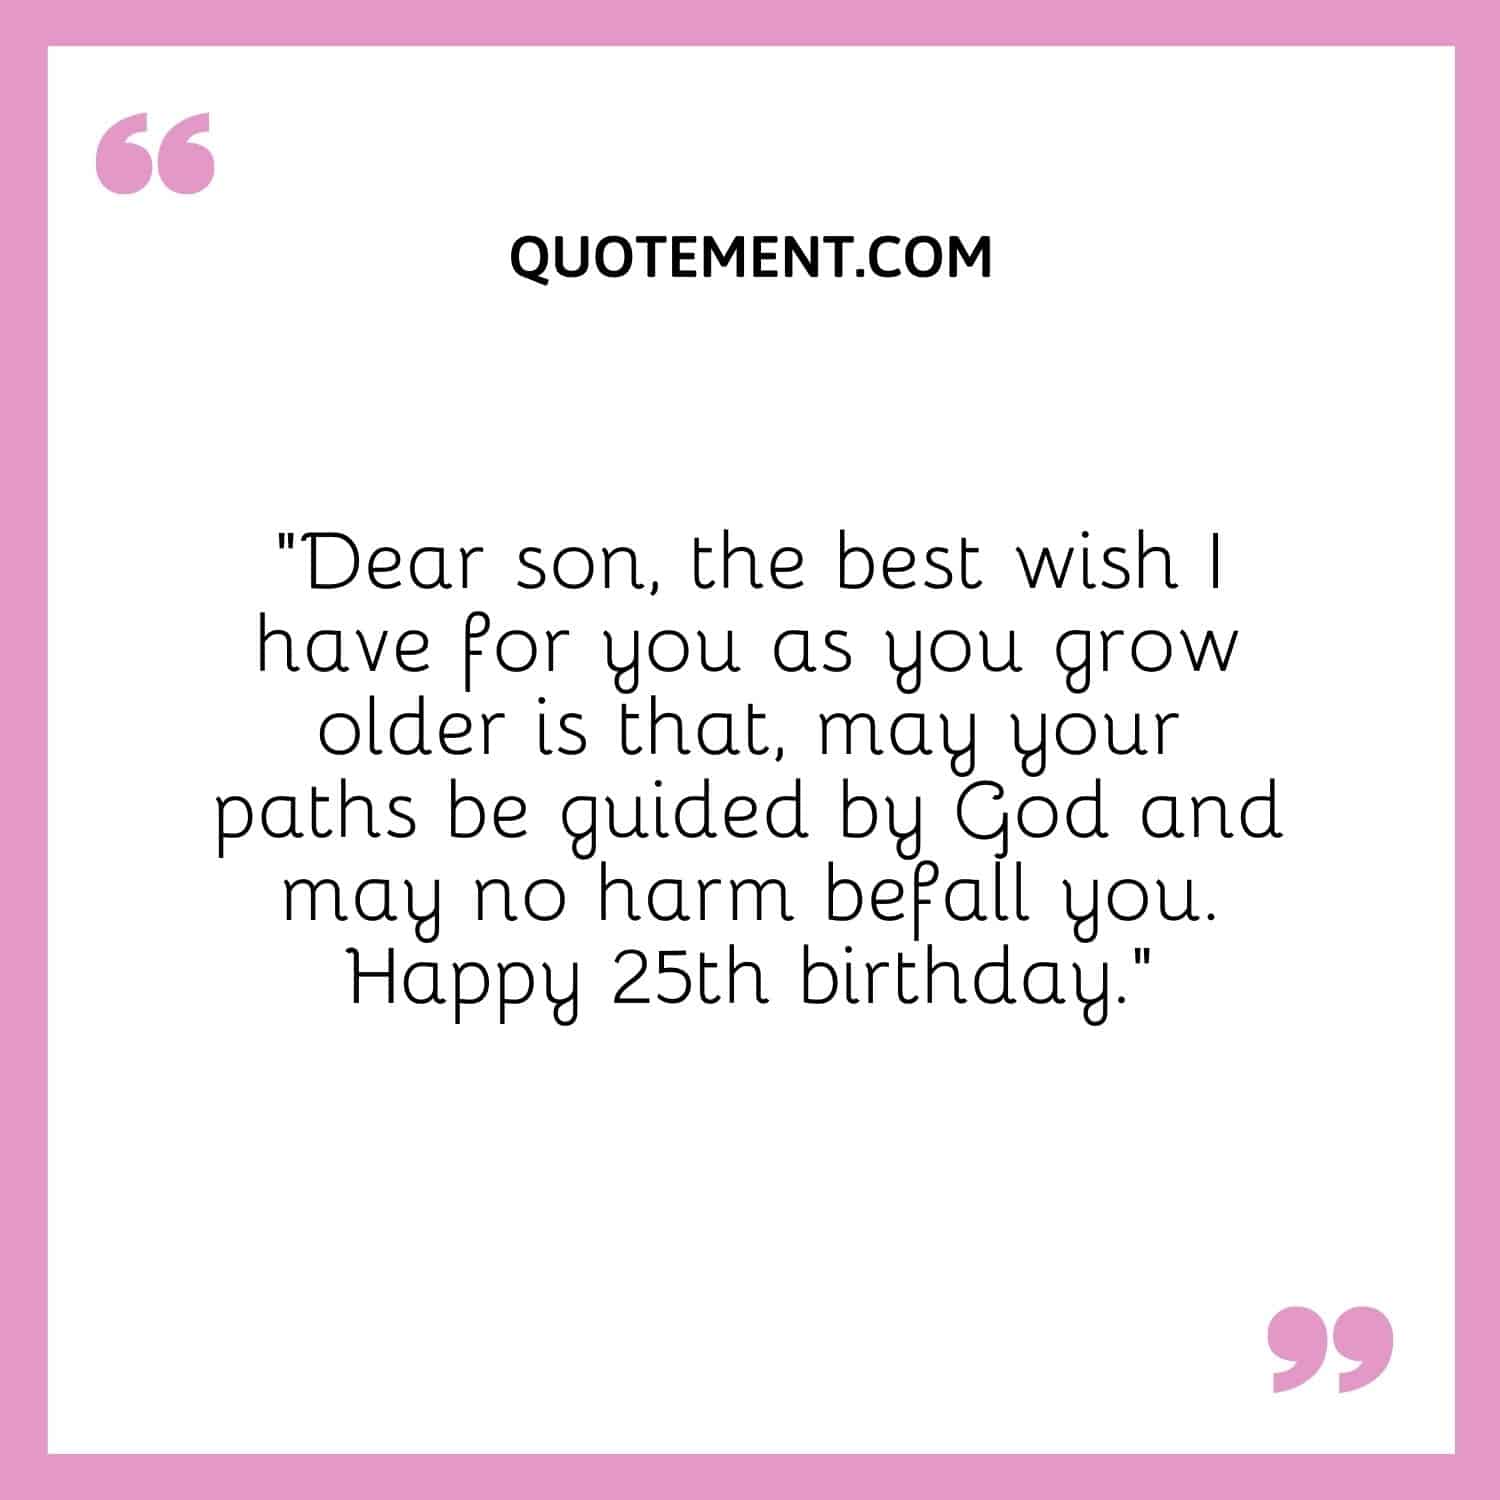 Dear son, the best wish I have for you as you grow older is that, may your paths be guided by God and may no harm befall you.